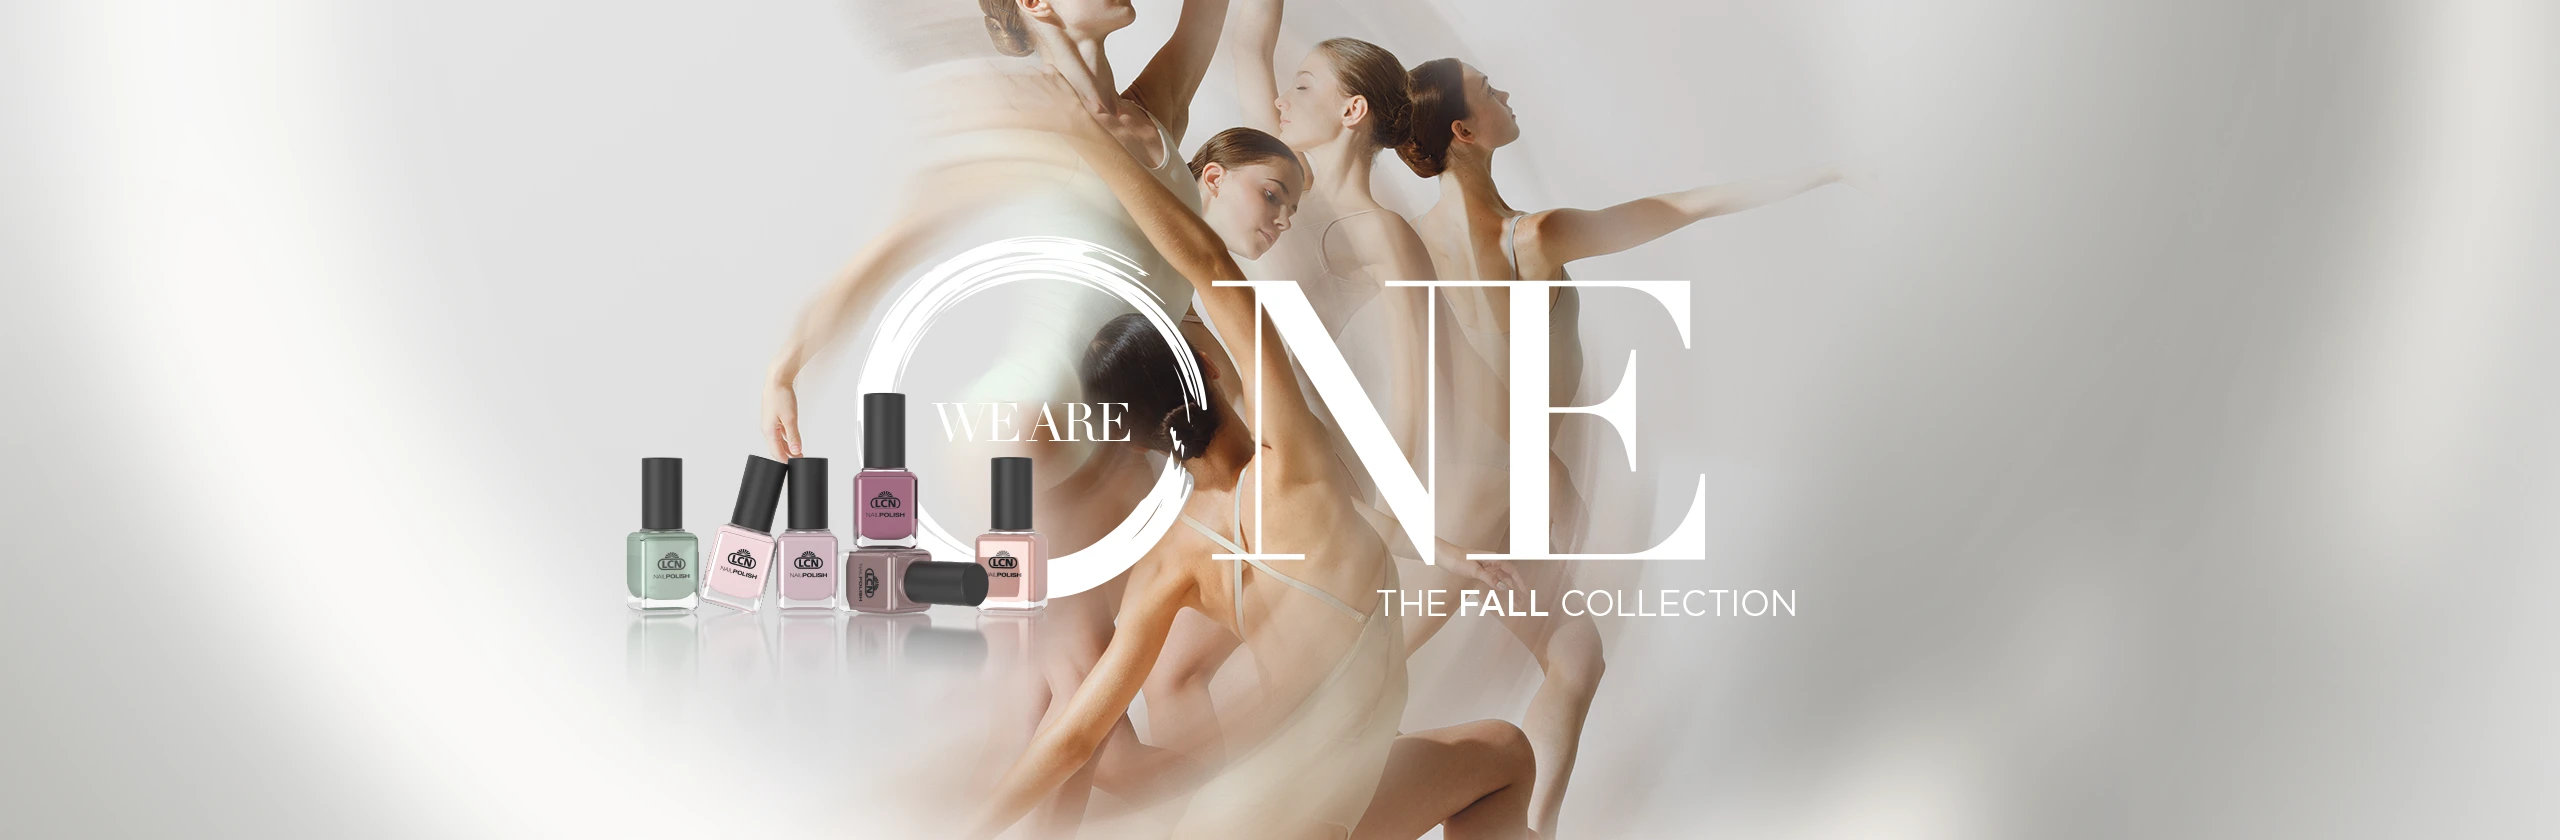 https://www.lcn-shop.de/we-are-one-the-fall-collection